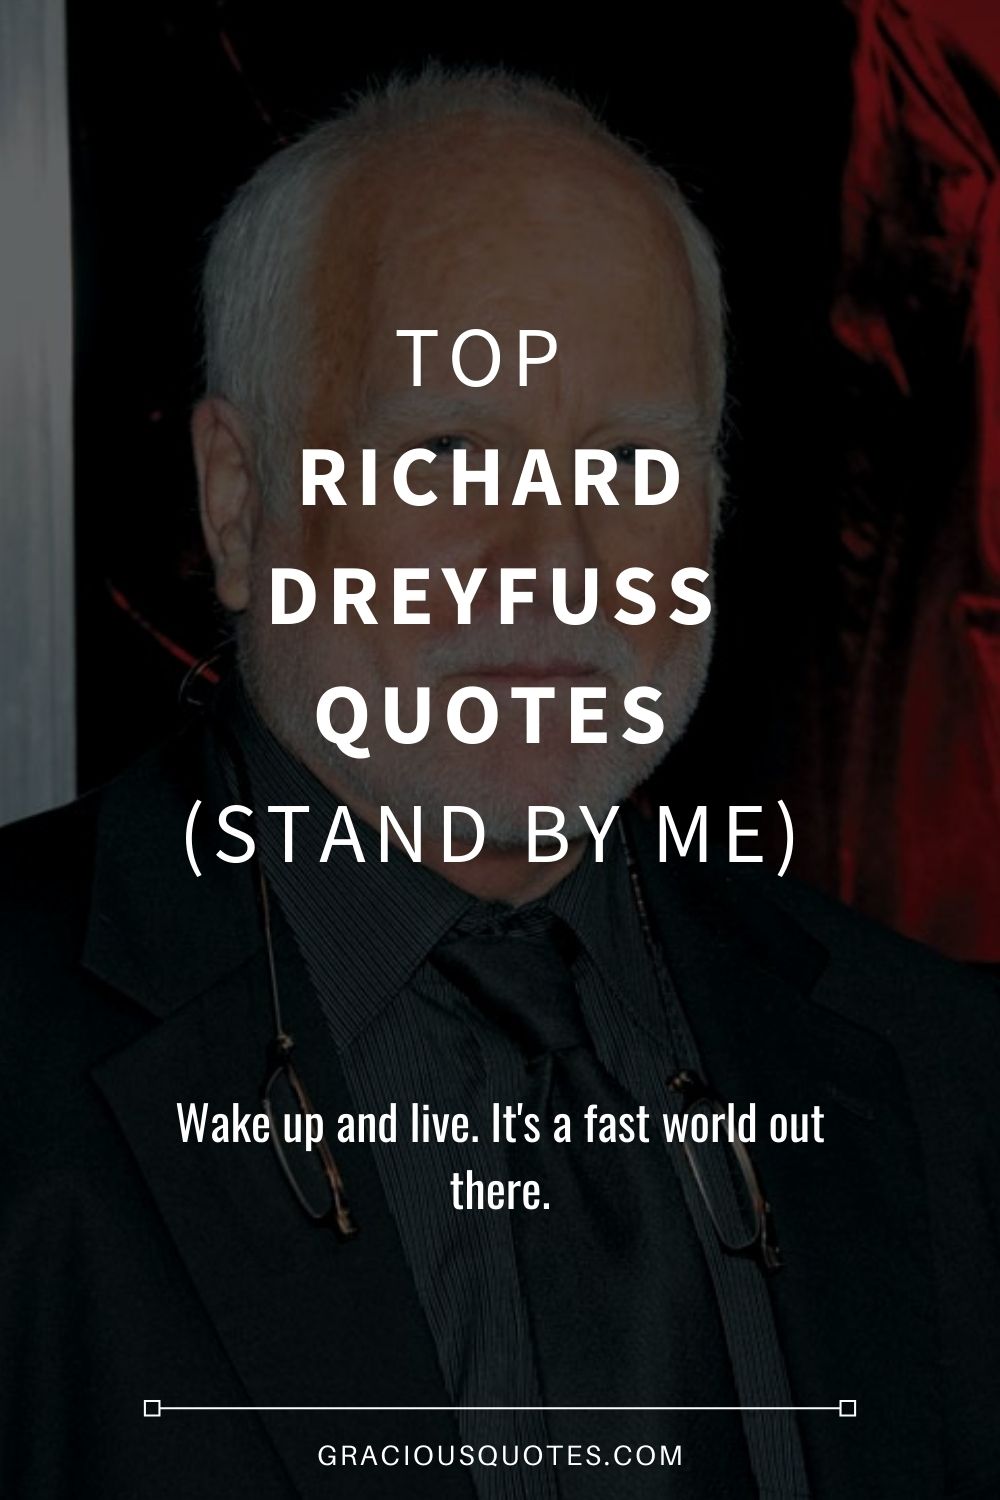 Top Richard Dreyfuss Quotes (STAND BY ME) - Gracious Quotes